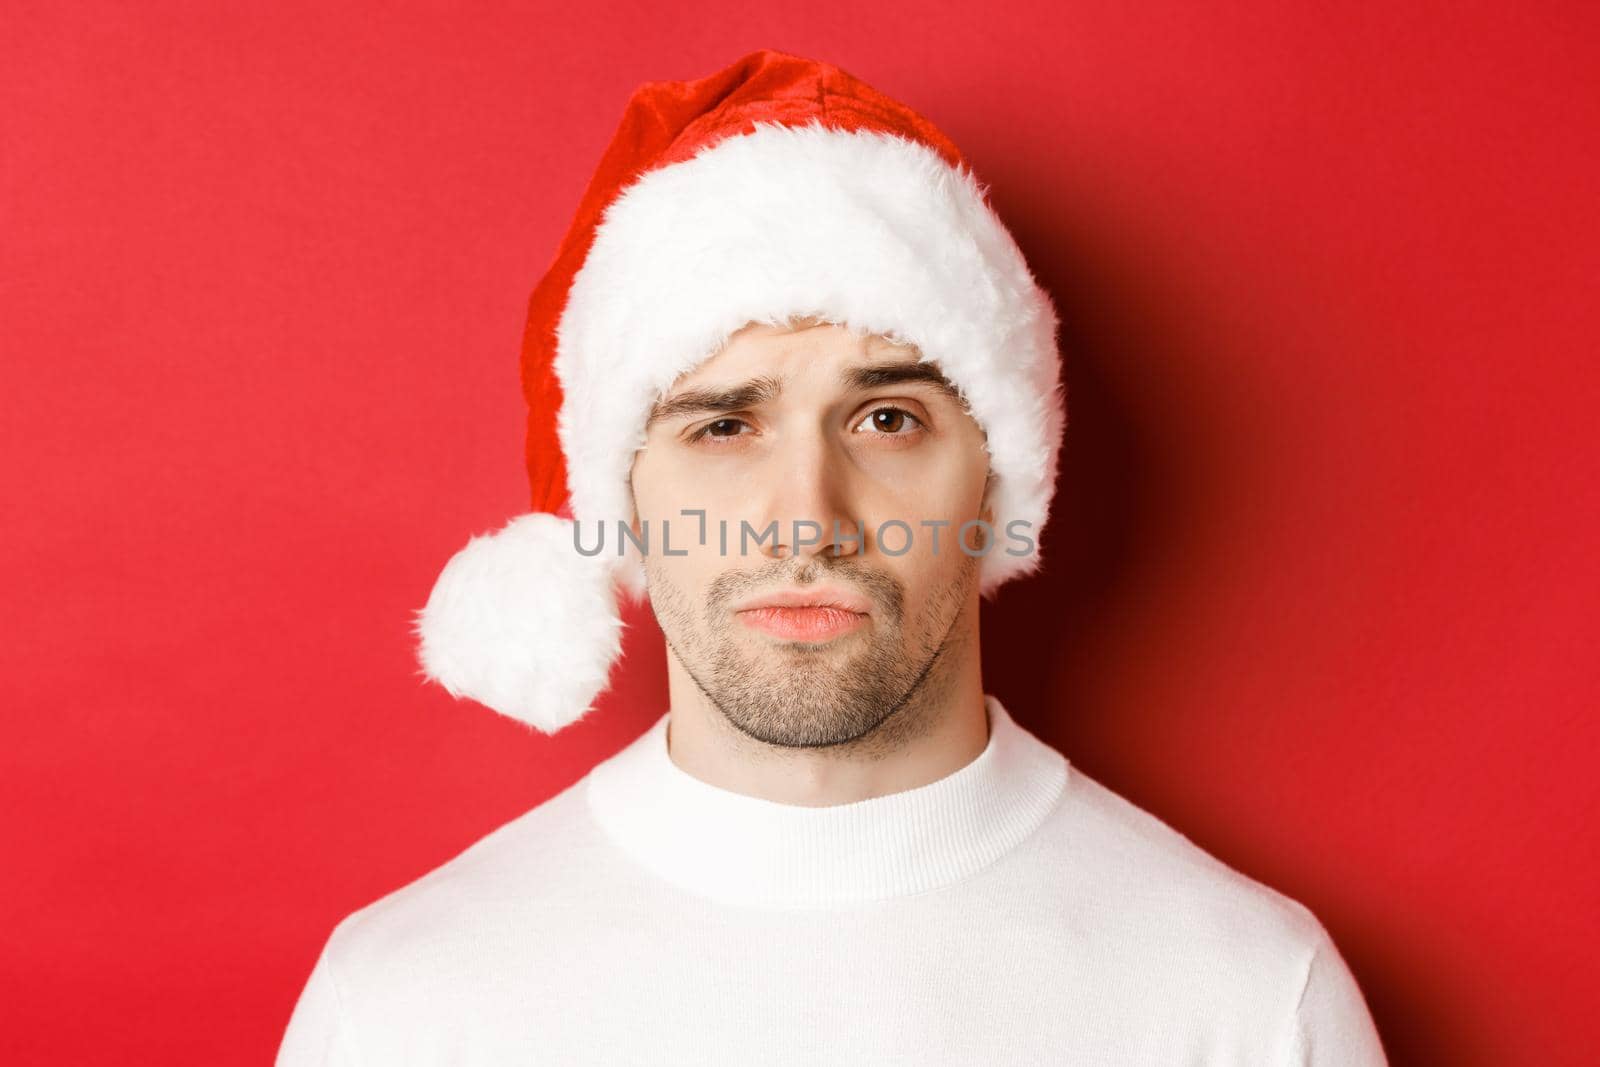 Close-up of doubtful frowning man, wearing santa hat and looking at camera uncertain, standing against red background.